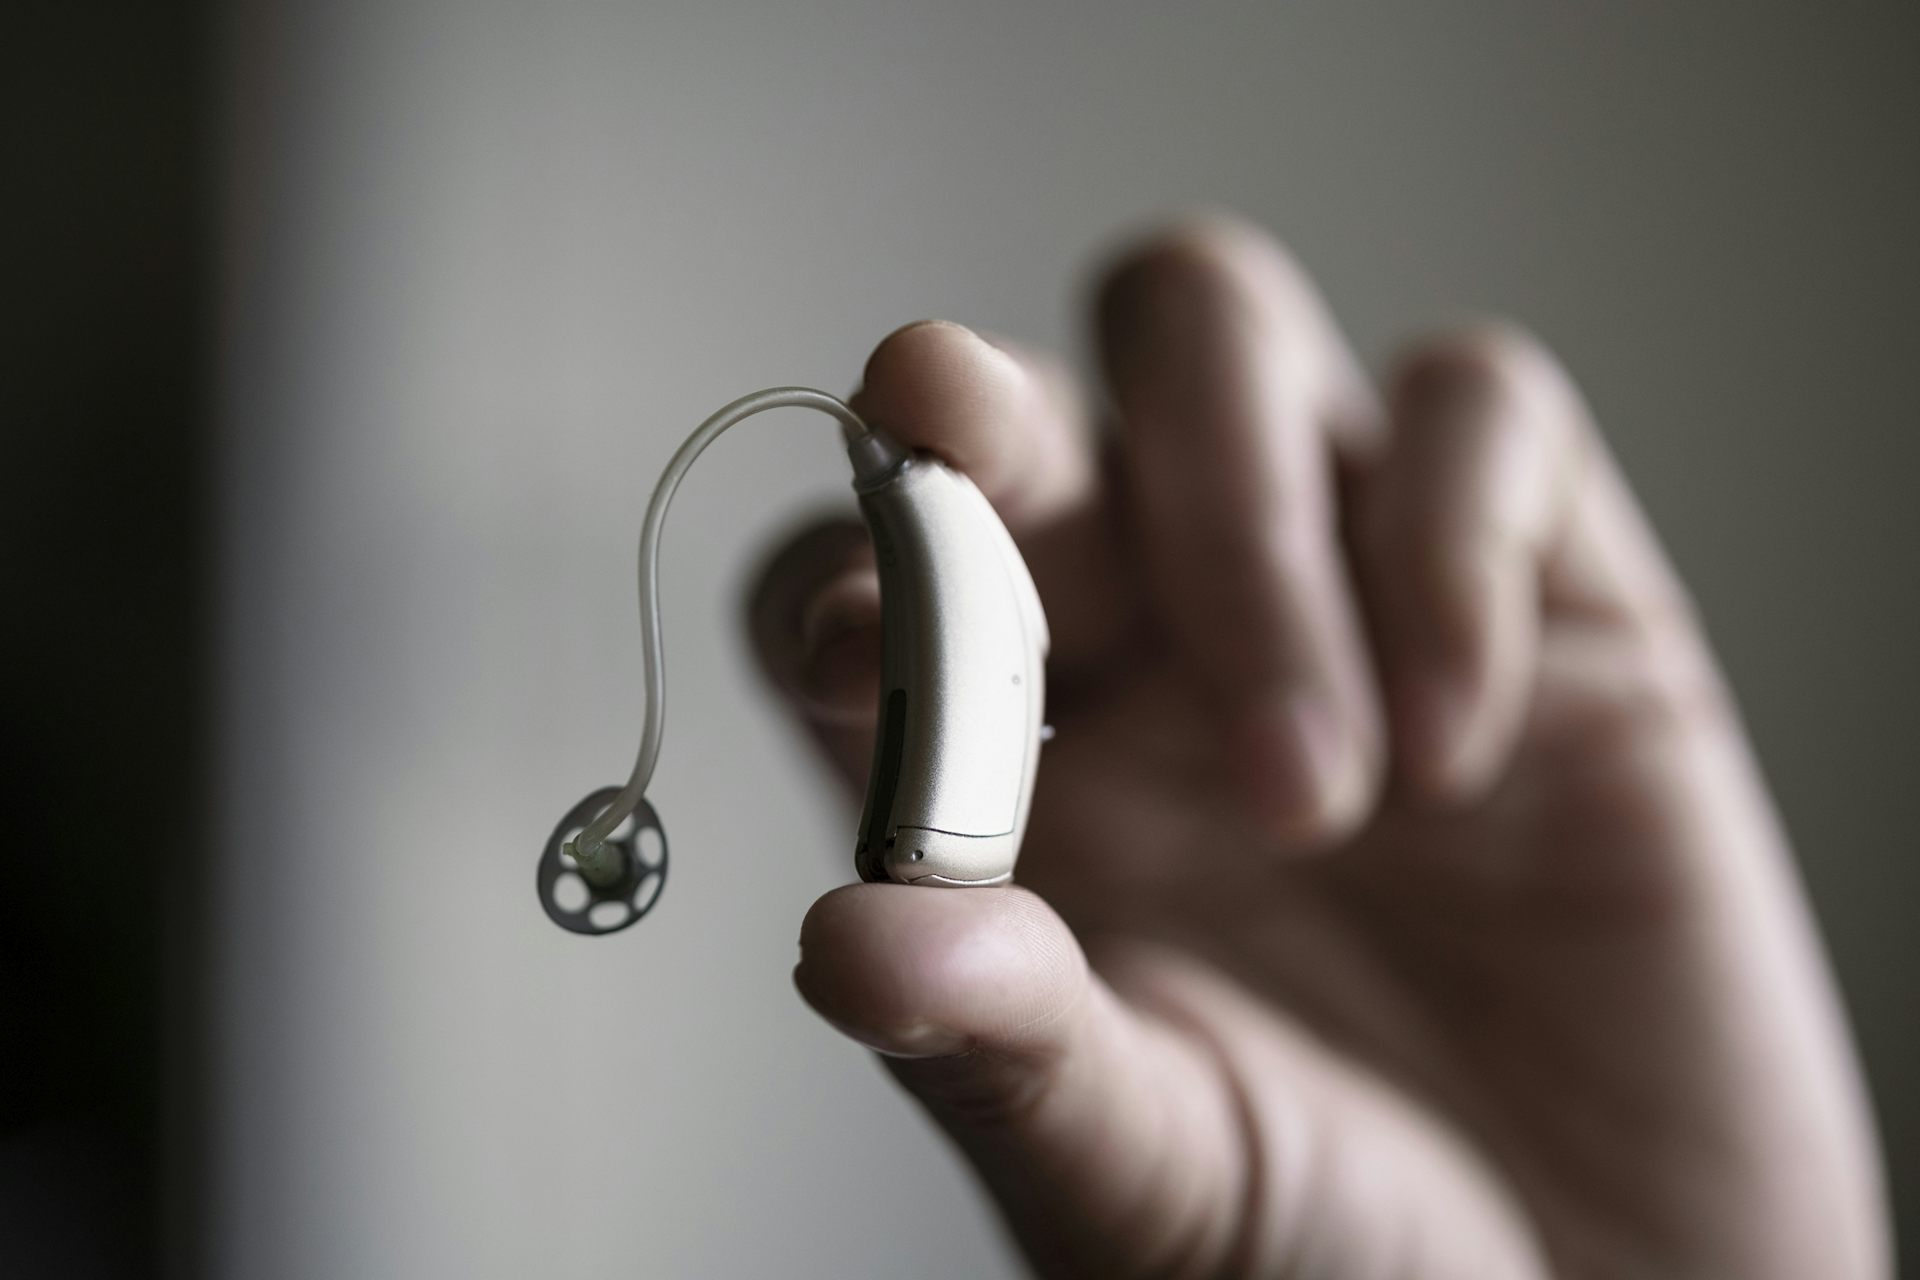 You may soon be able to buy hearing aids over the counter at your 